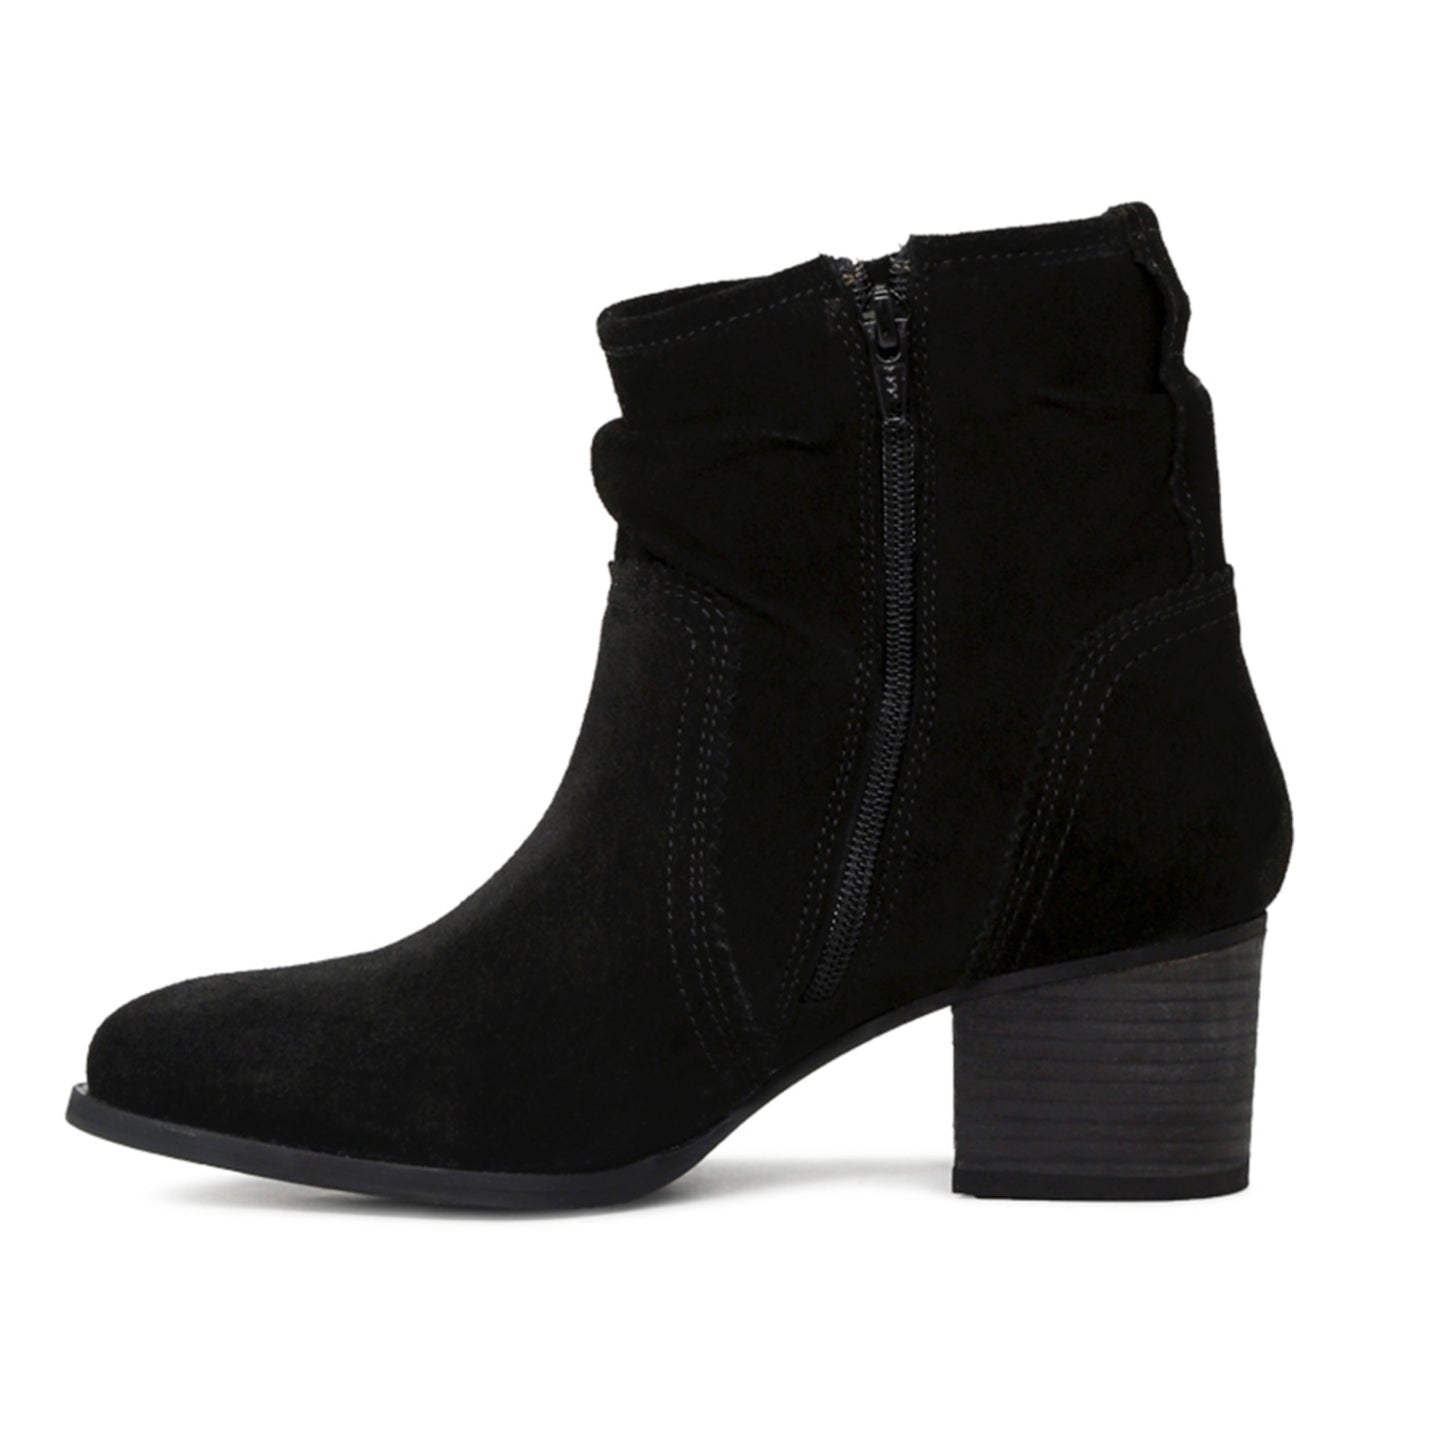 Black Bowie Stacked Heel Leather Boots